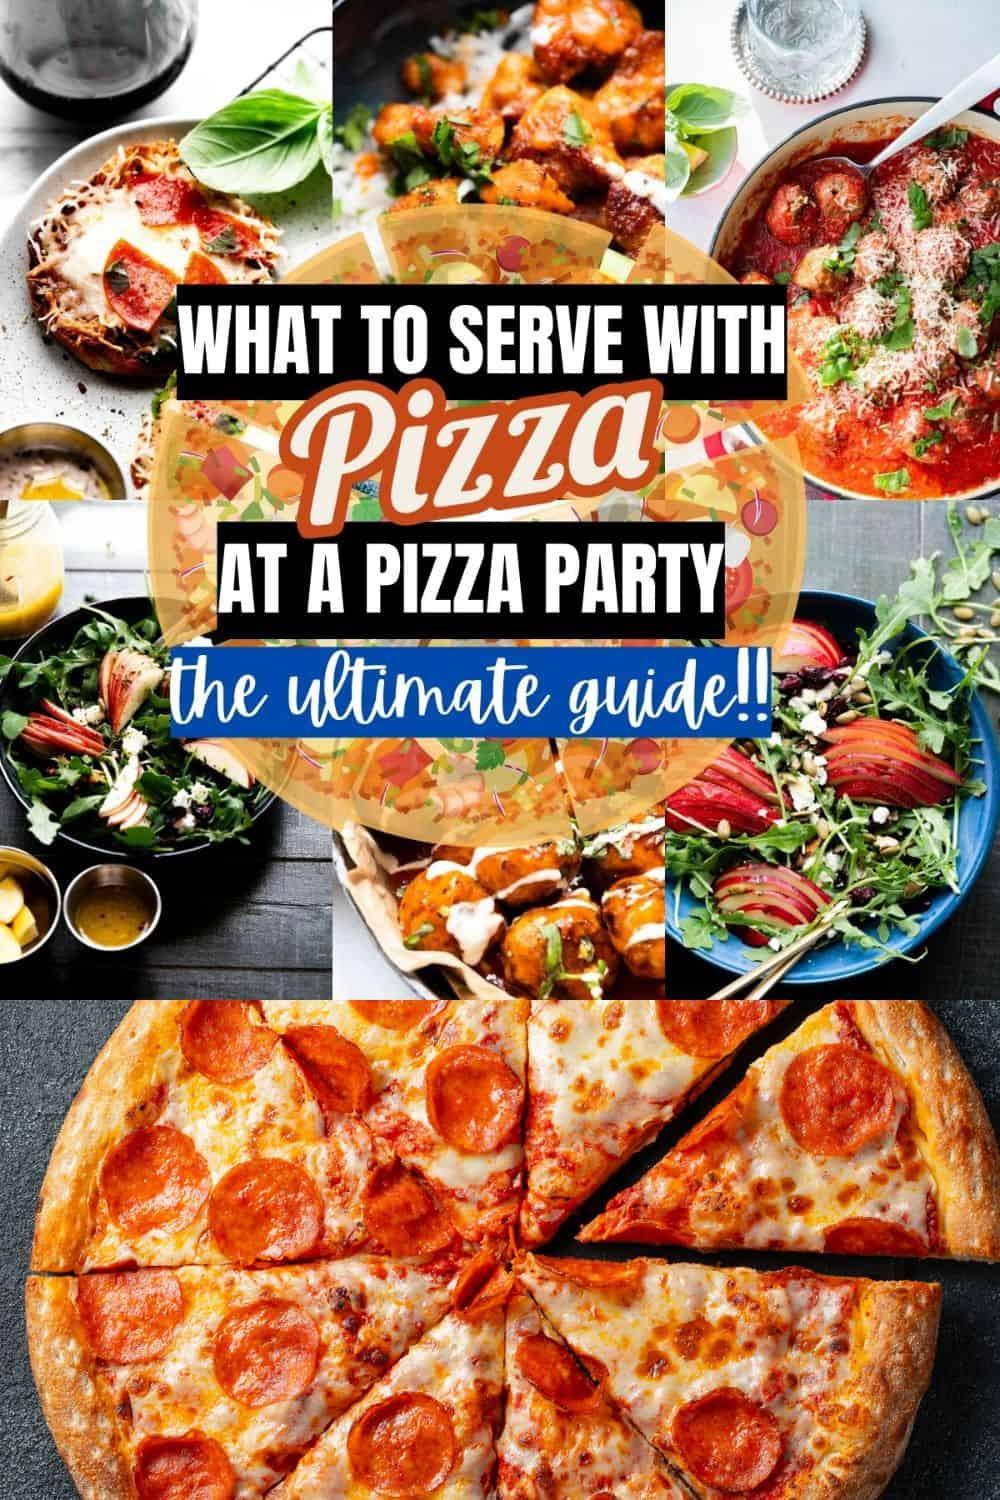 What to serve with pizza at a pizza party ultimate guide pinterest pin (featuring pictures of pizza and text overlay).